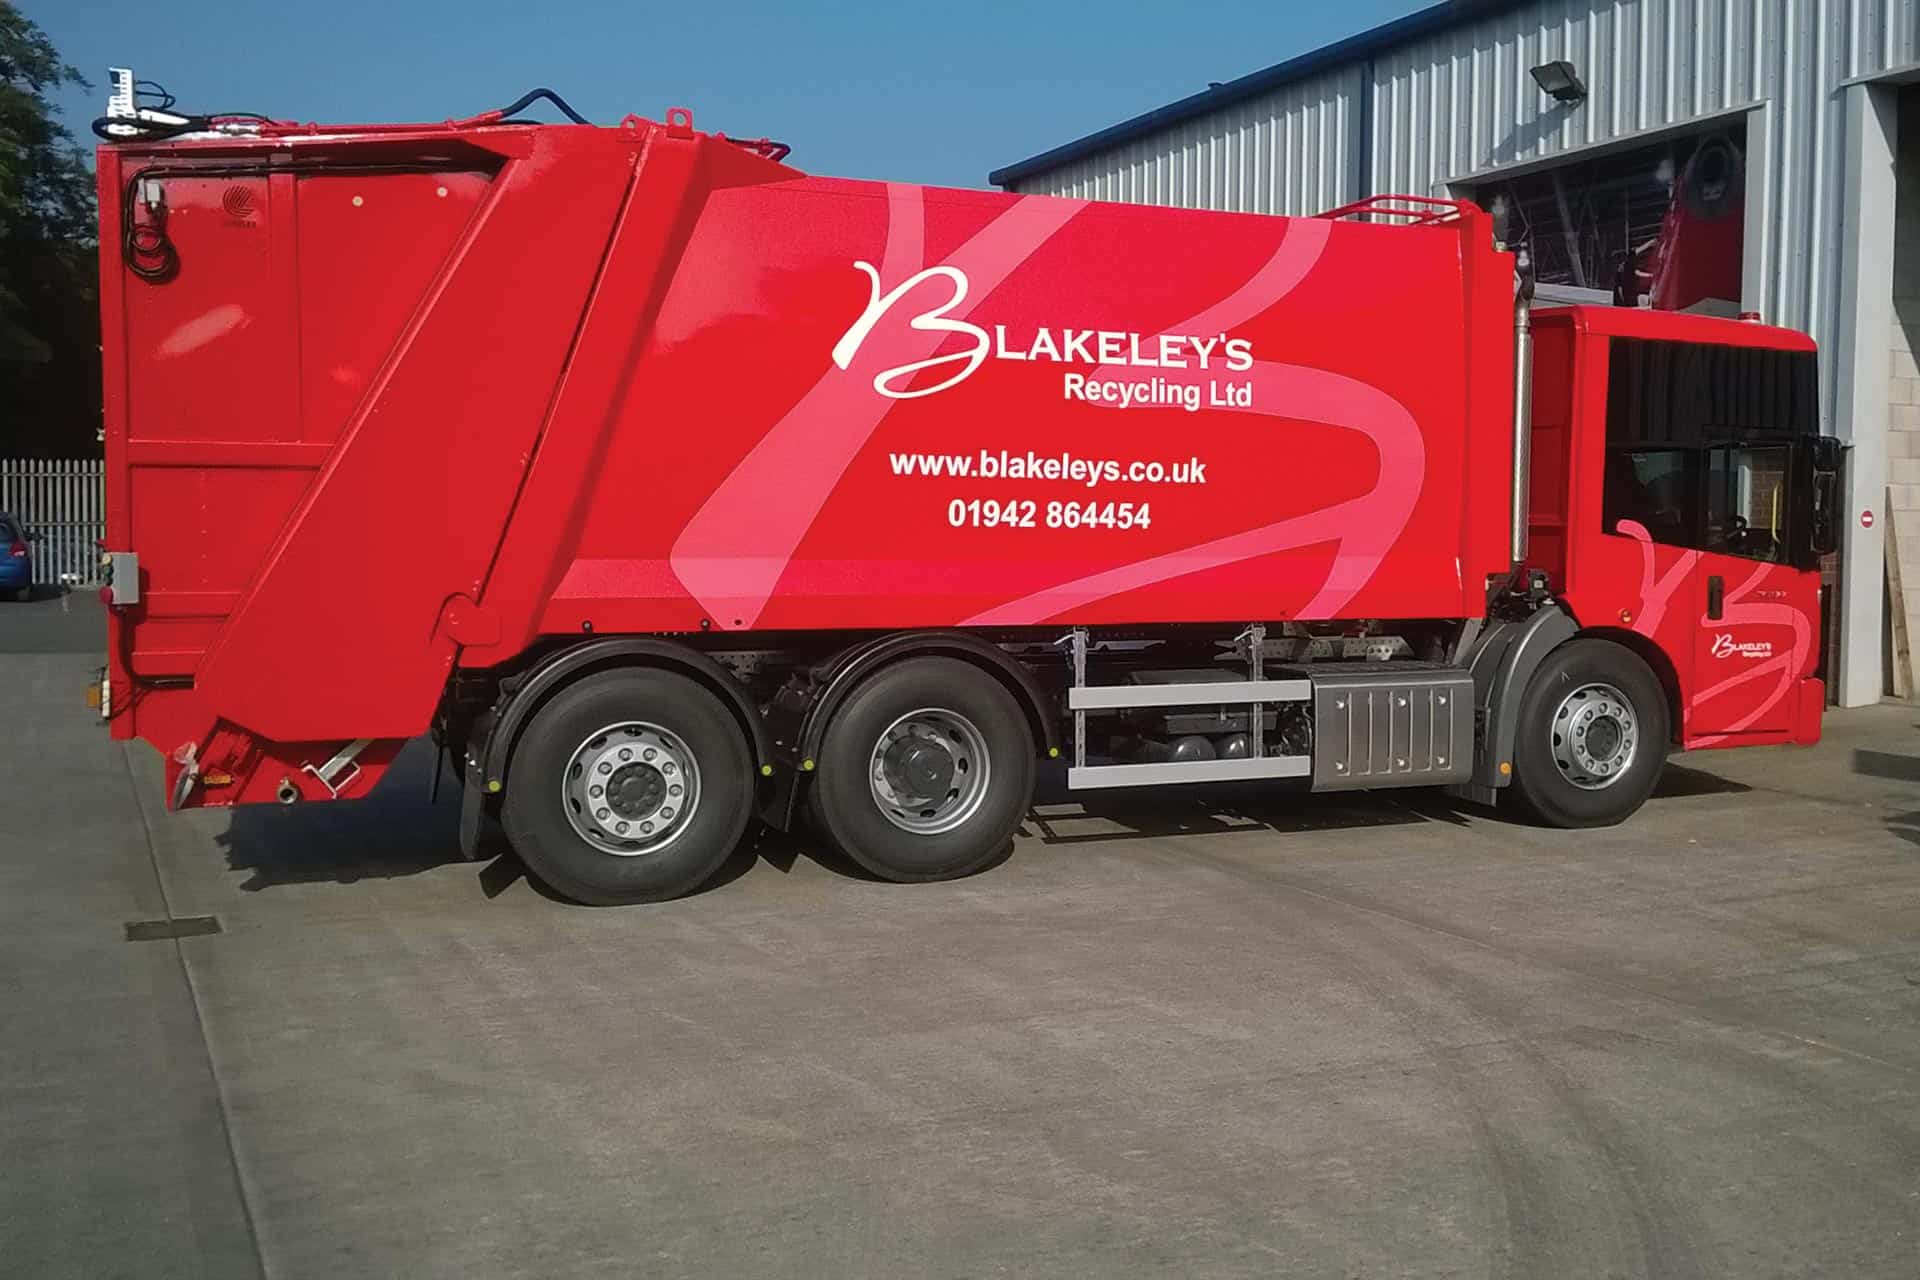 Blakeley's Recycling - digitally printed and contour cut graphics wagon